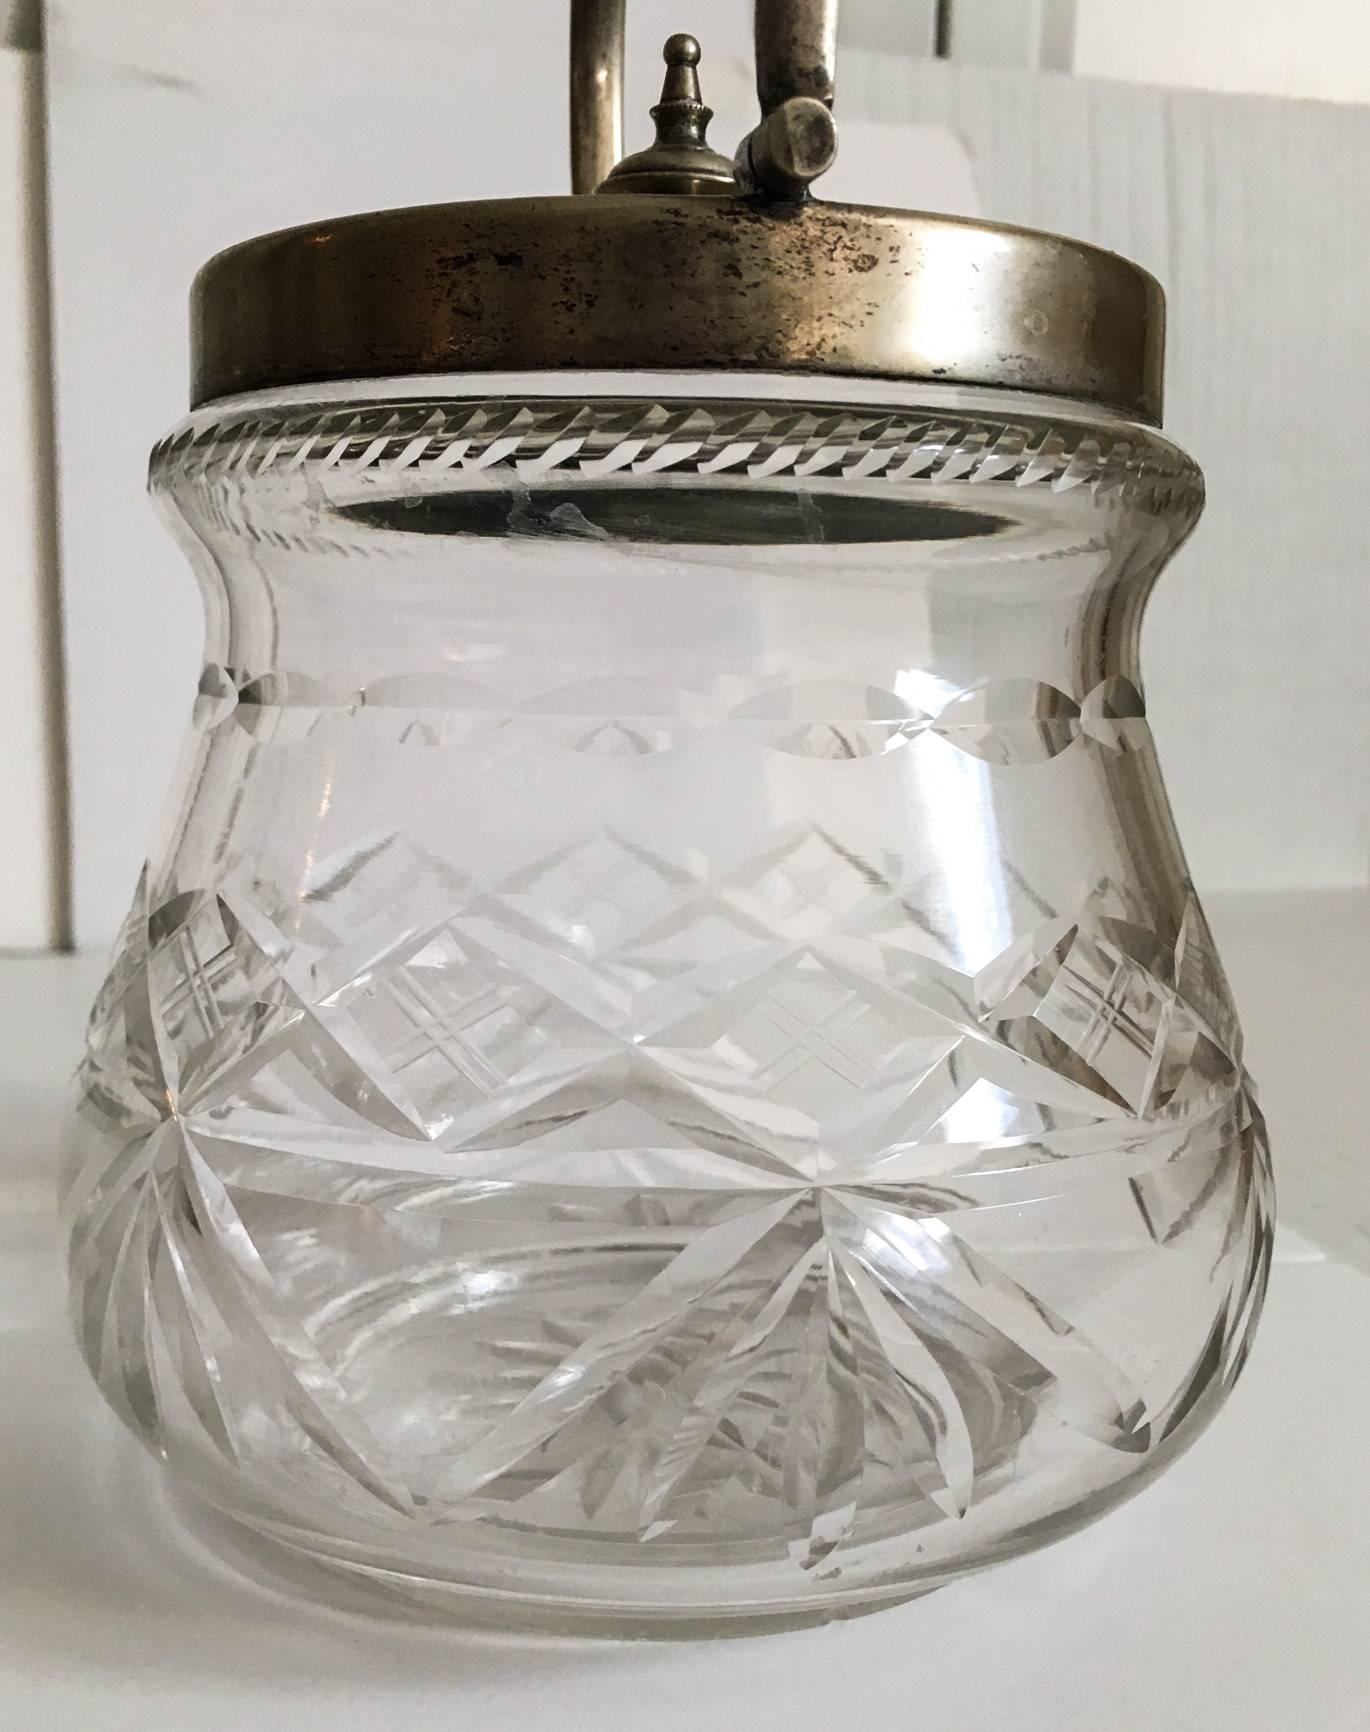 Forged 1930s Slack and Barlow English Cut-Glass and Silver Biscuit Jar